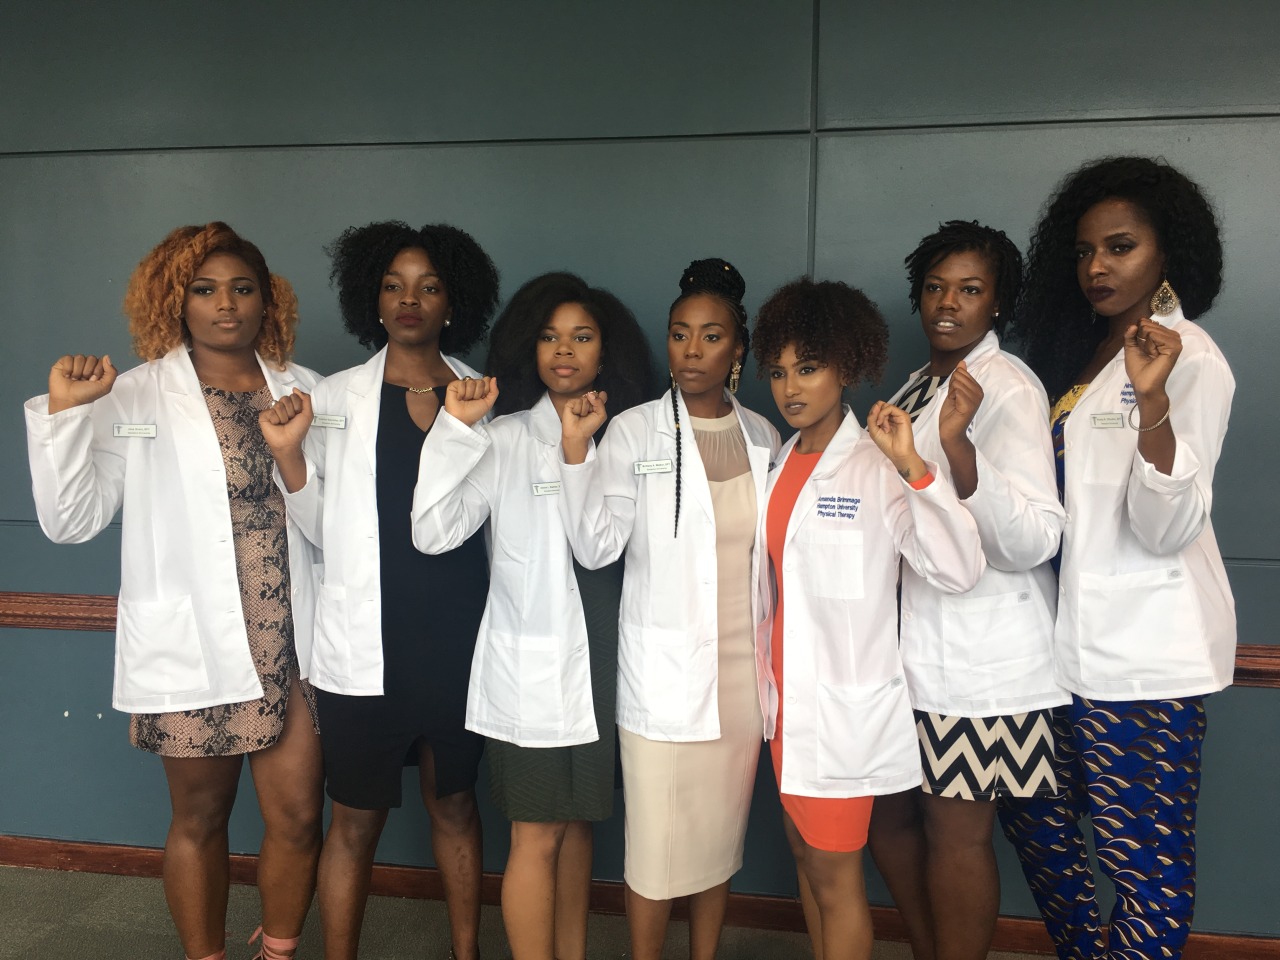 themindoflove: Hampton University Doctor of Physical Therapy Students ✨